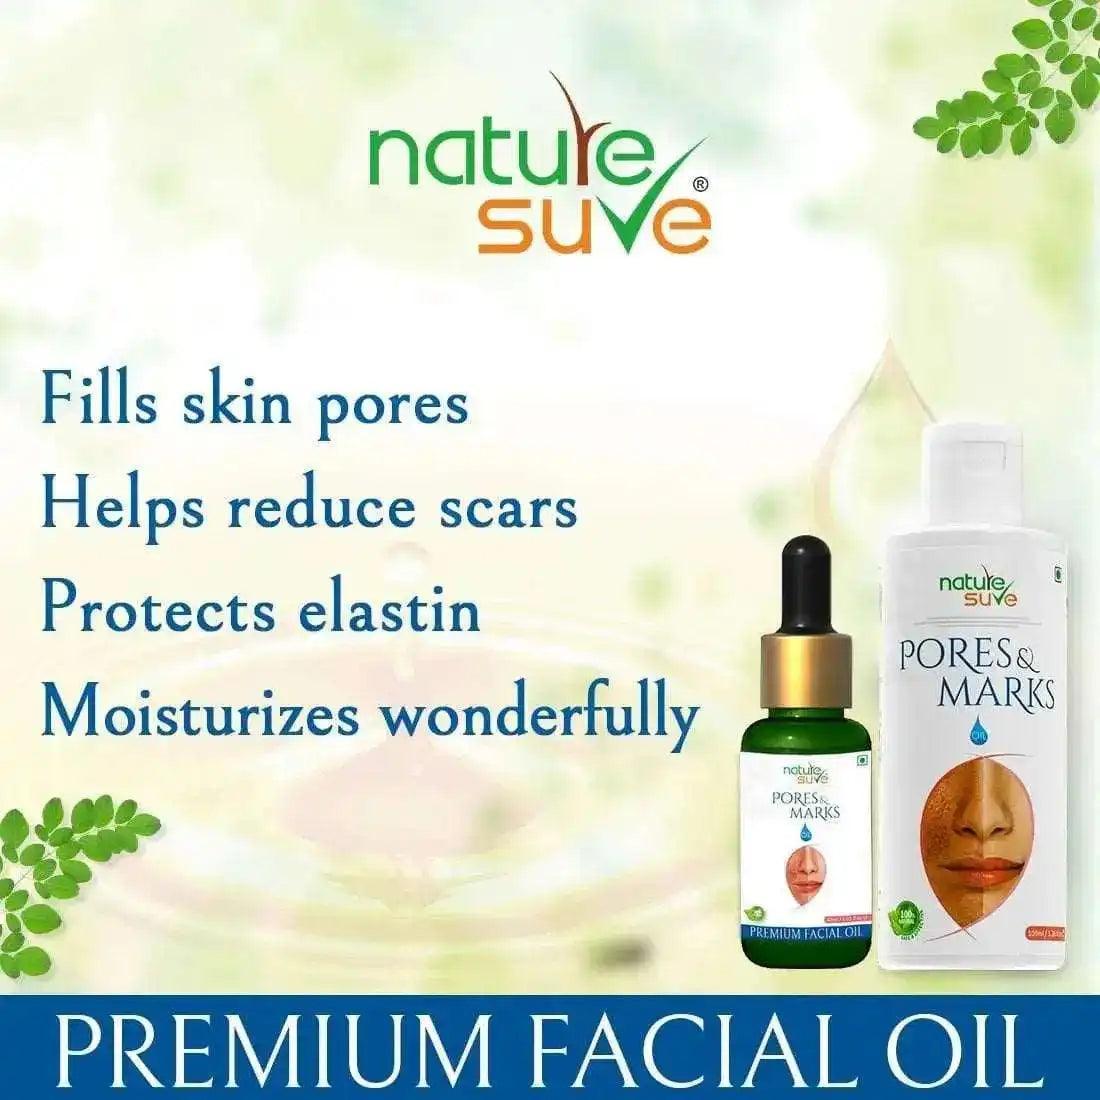 Nature Sure Pores and Marks Oil Helps Reduce Scars - everteen-neud.com